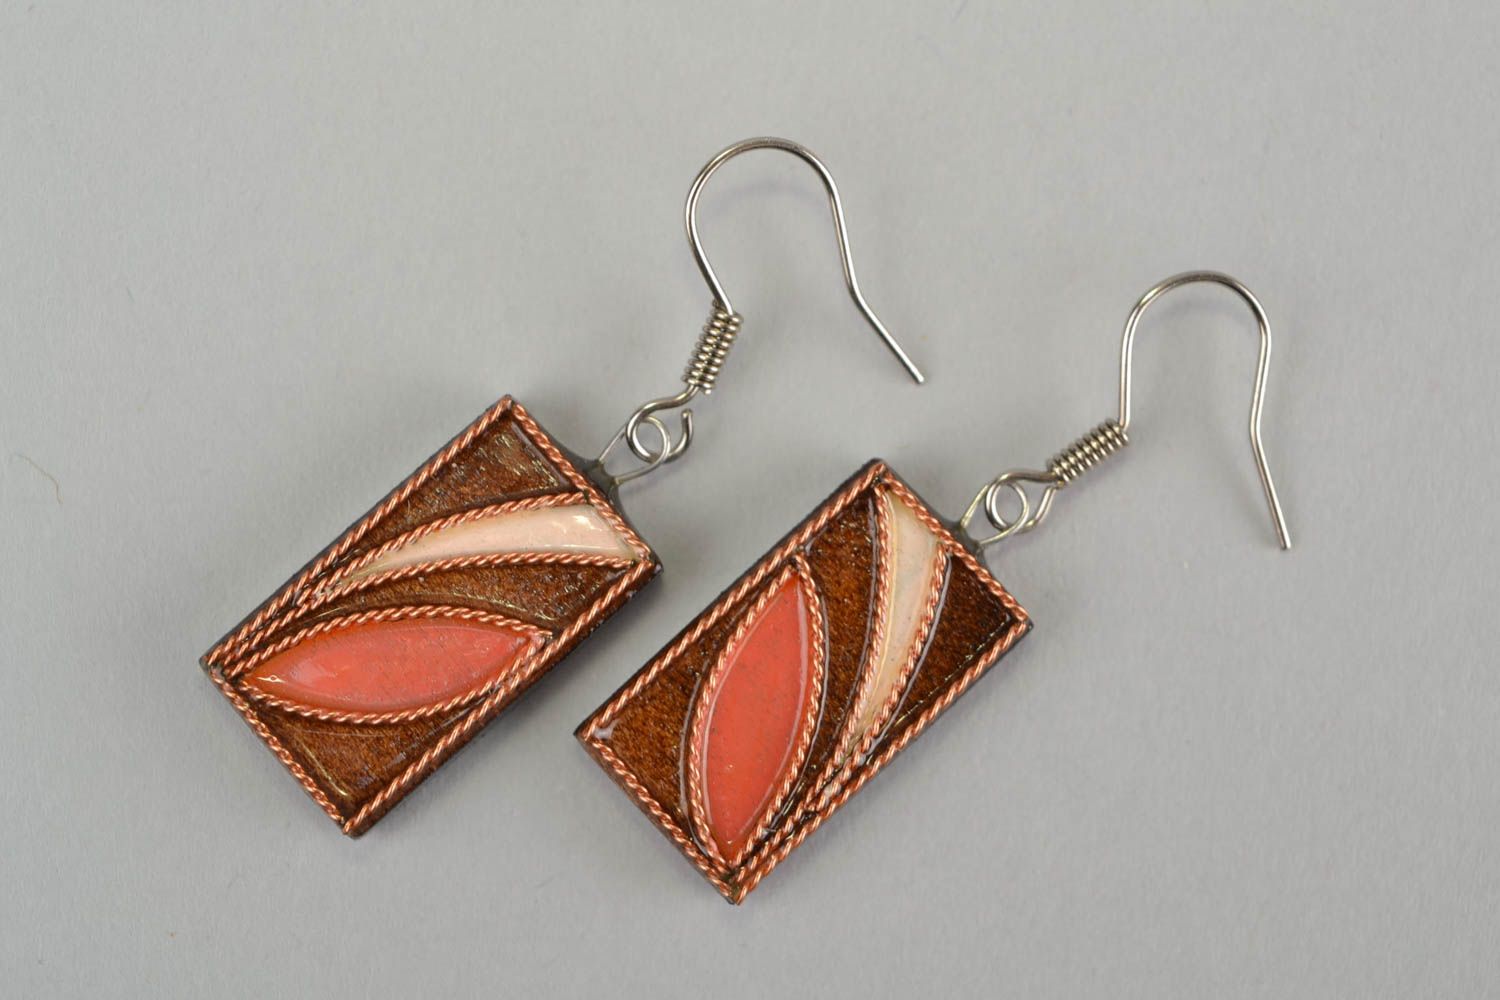 Handmade wooden earrings fashion accessories beautiful jewellery gifts for her photo 2